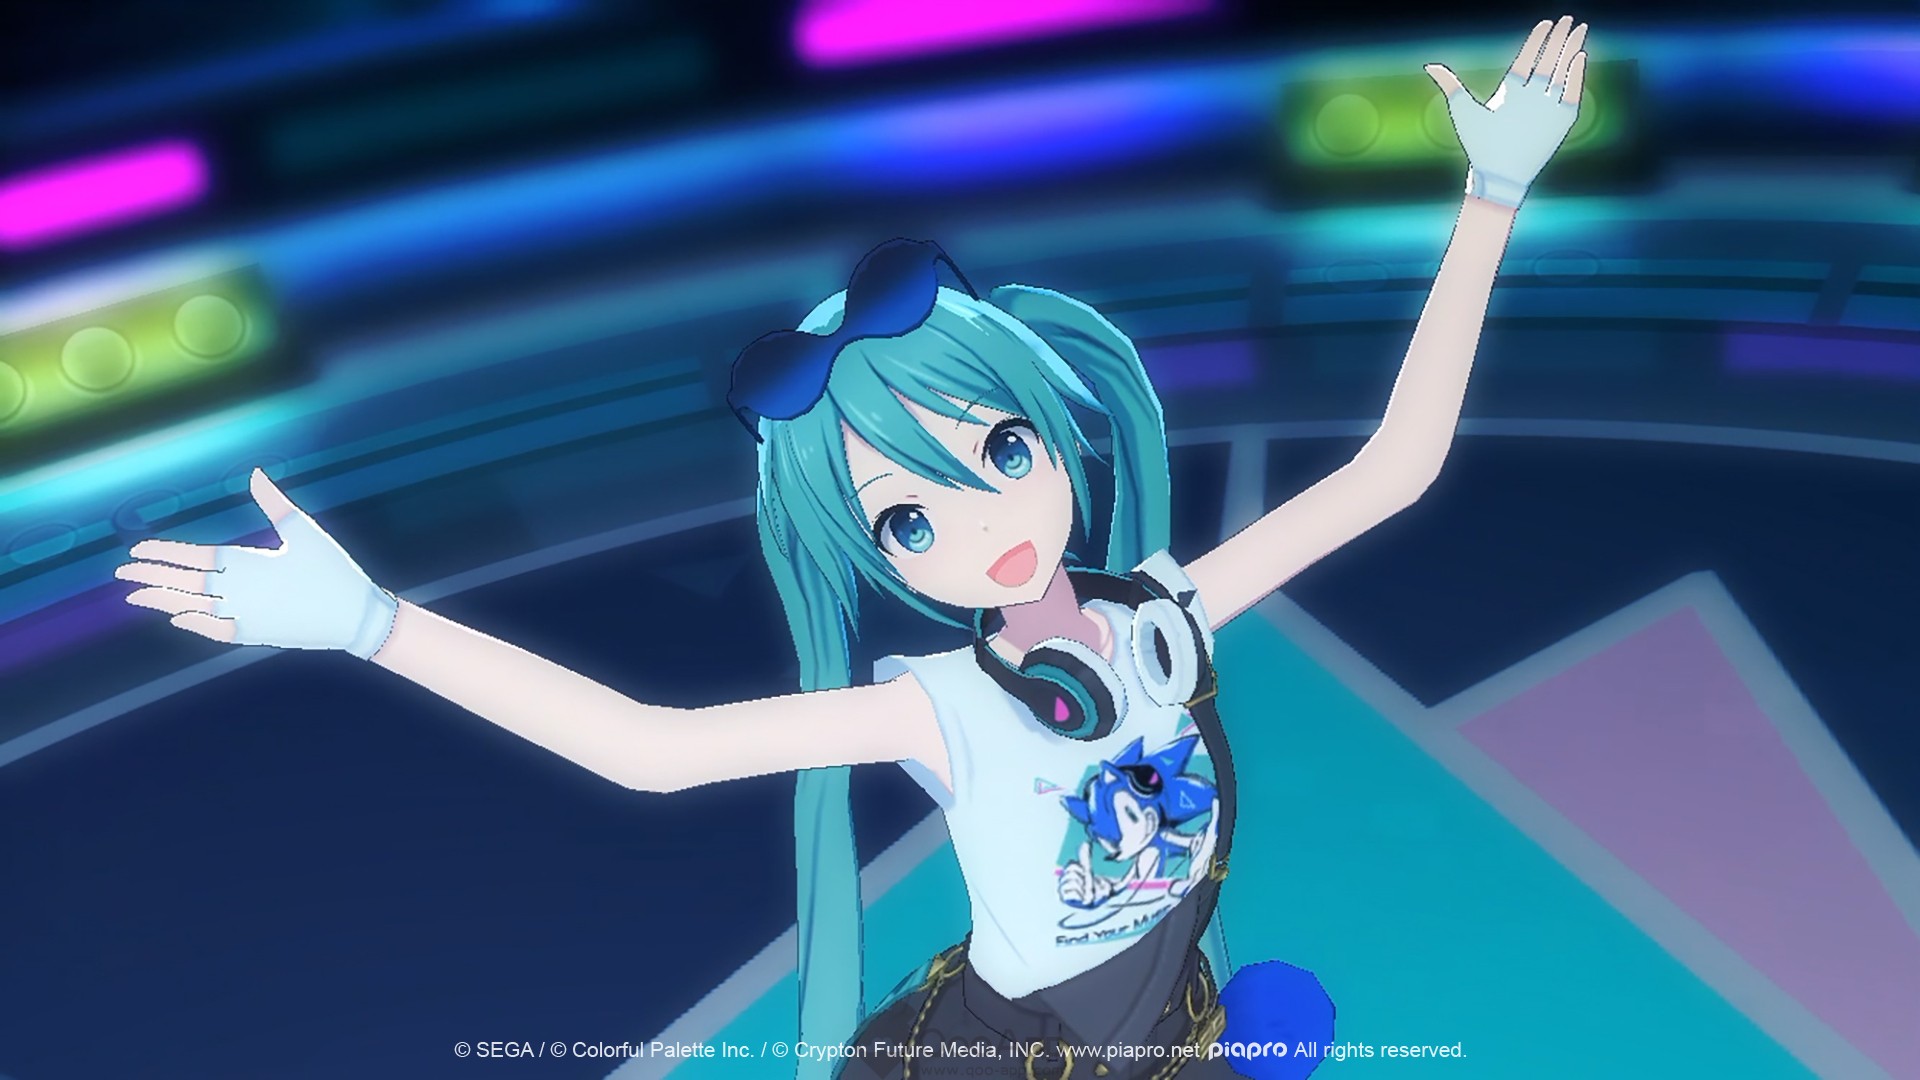 Hatsune Miku: Colorful Stage Mobile Rhythm Game Now Goes Live! Login to Get Up to 900 Crystals!: Anime Games Platform